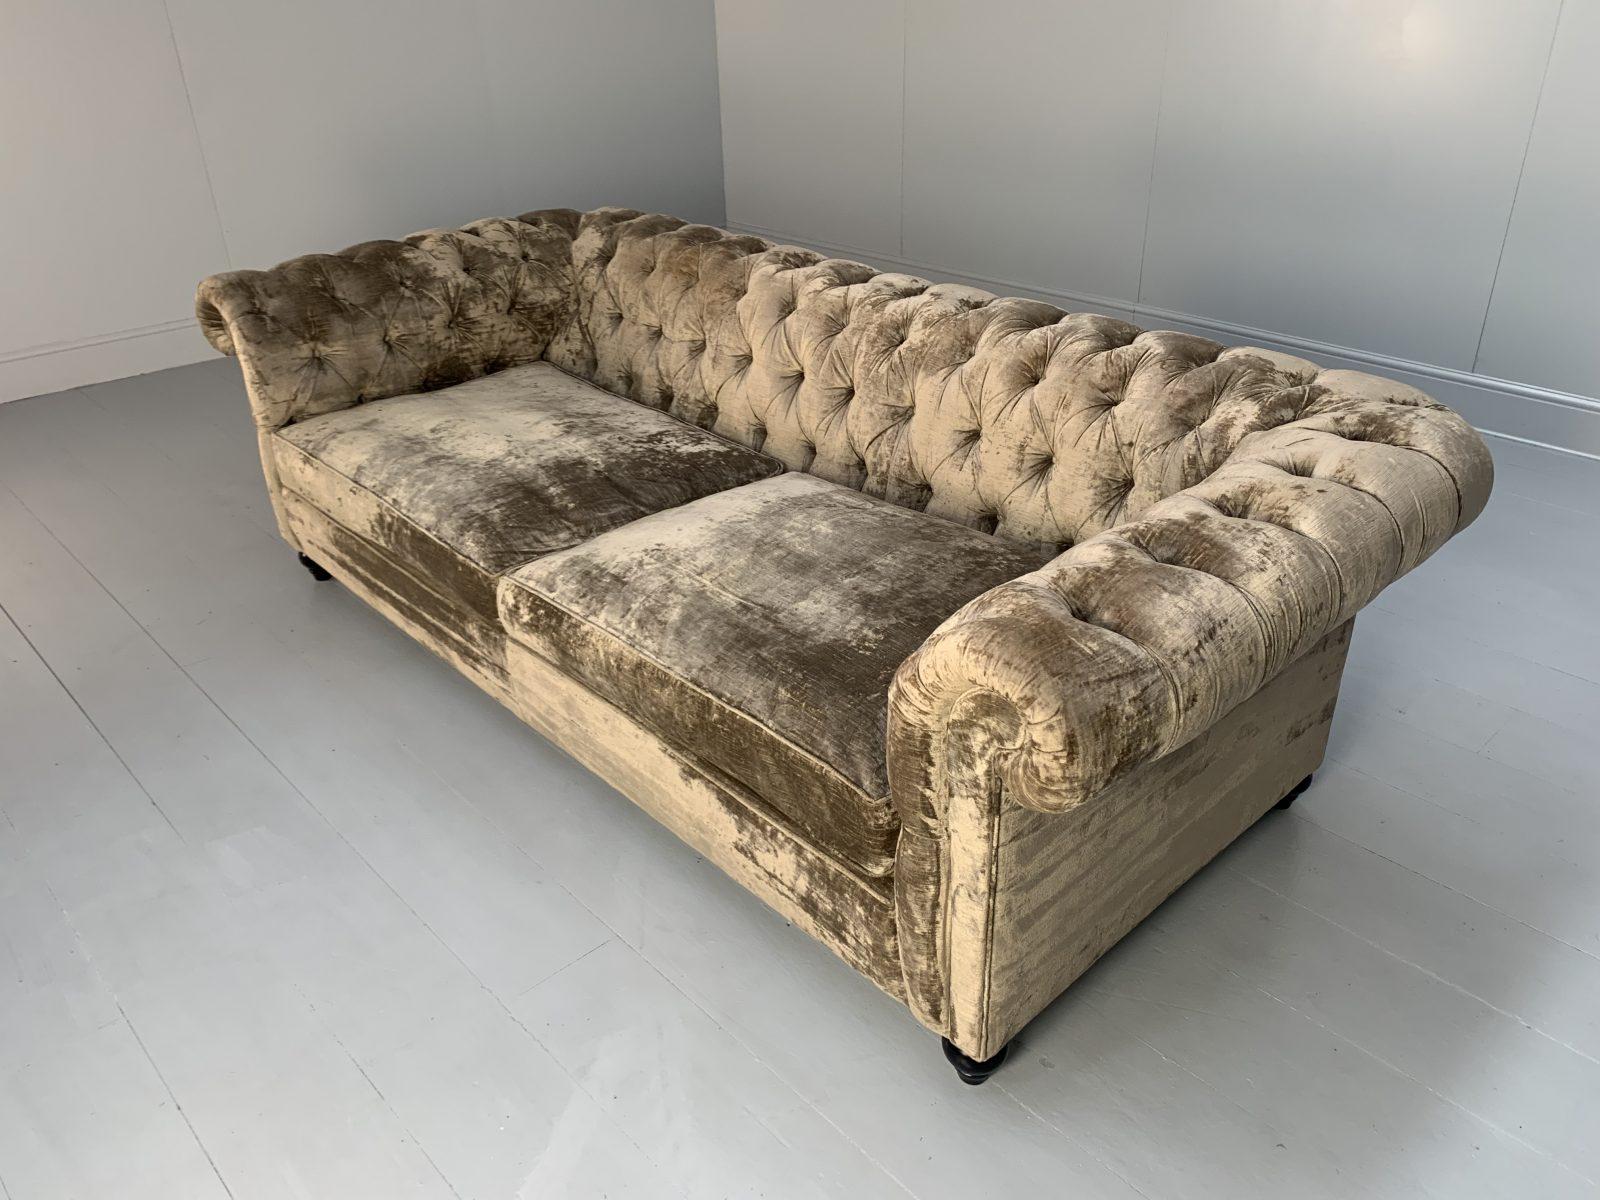 Contemporary Duresta “Connaught” Grand Chesterfield Sofa – In Pale Gold Mink Brown “Rembrandt